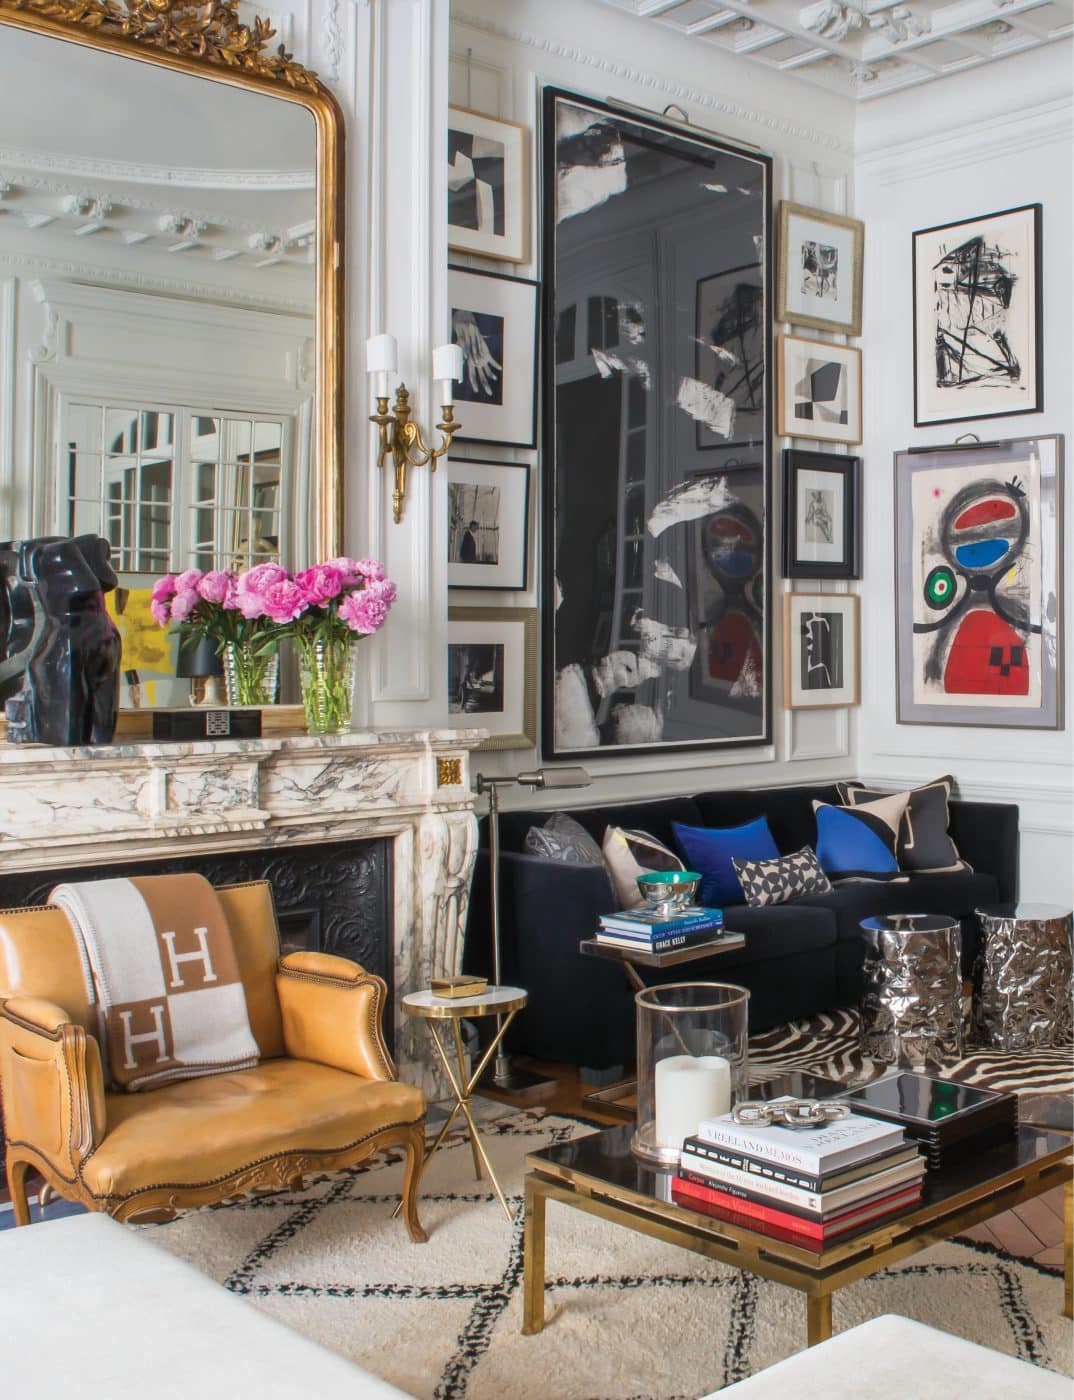 Interior designer David Jimenez living room of his former home on Paris's avenue Marceau from his book Parisian By Design published by Rizzoli 